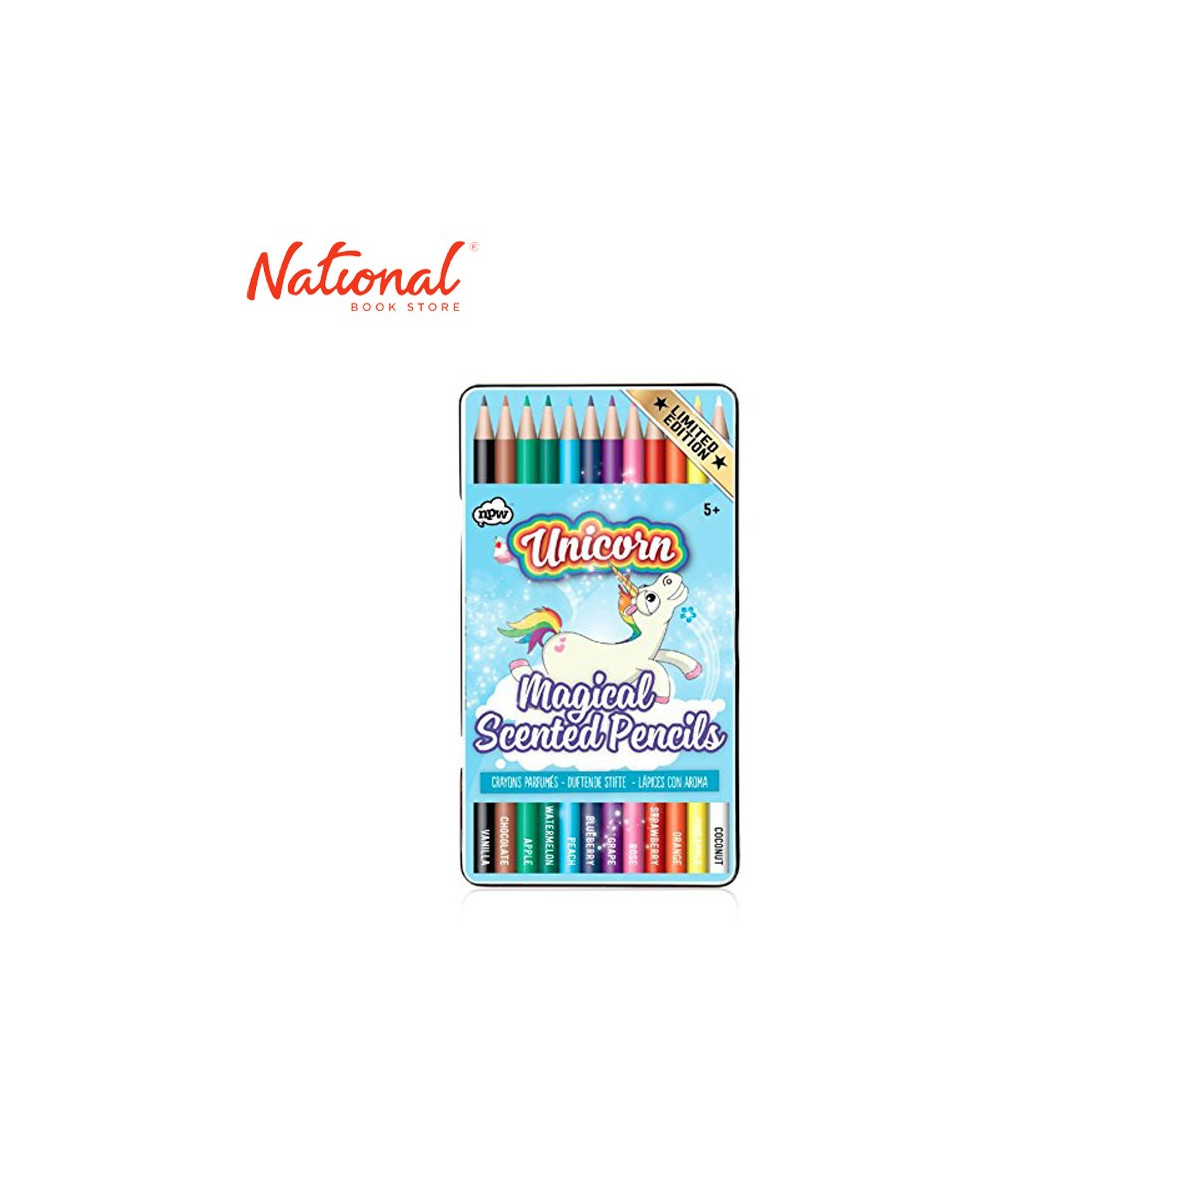 NATURAL PRODUCTS COLORED PENCIL NPW60140 BLUE UNICORN 12 COLORS MAGICAL SCENTED TIN CAN